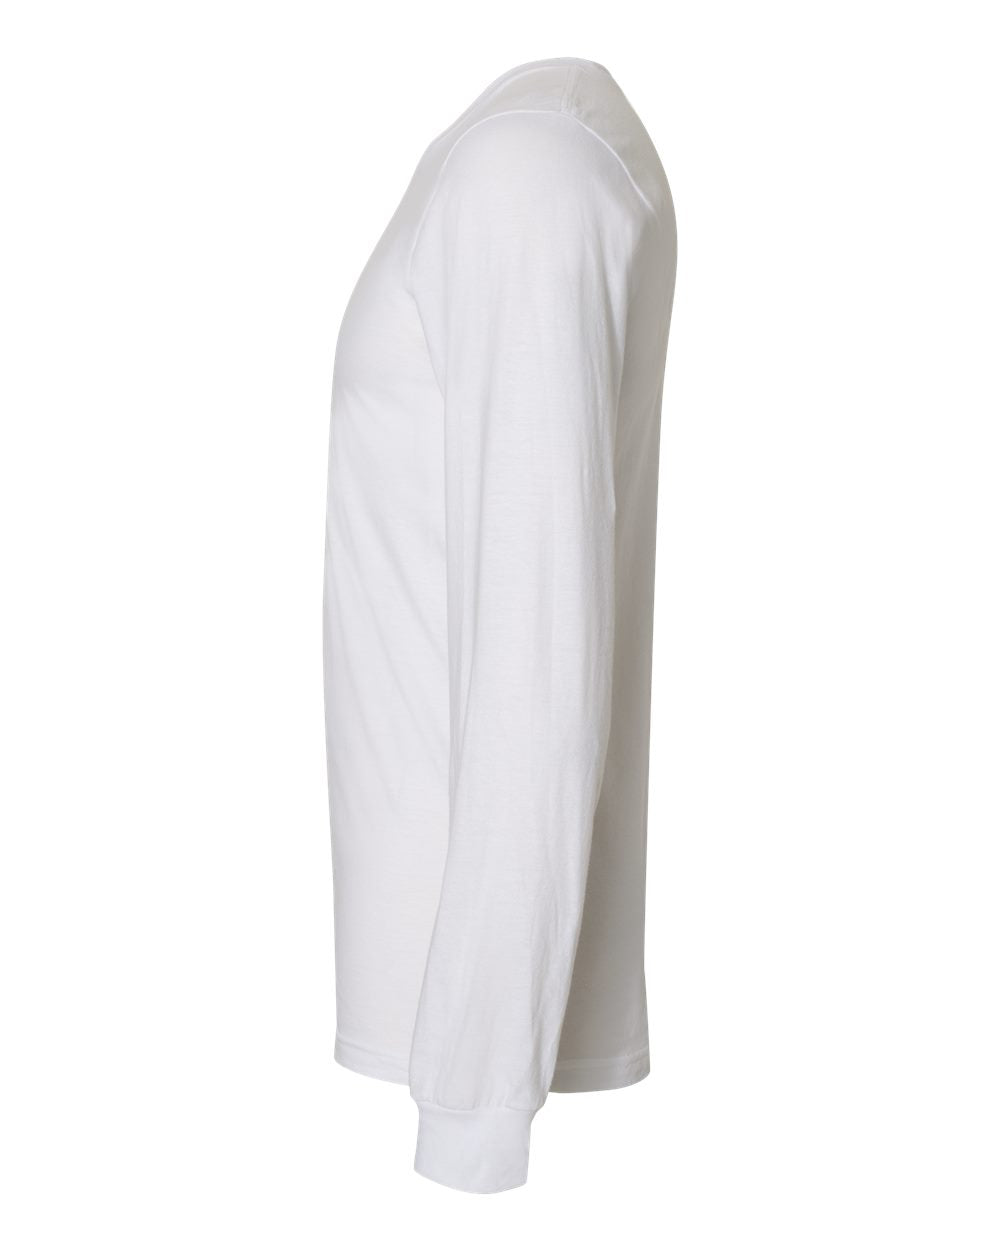 American Apparel Fine Jersey Long Sleeve Tee 2007 #color_White